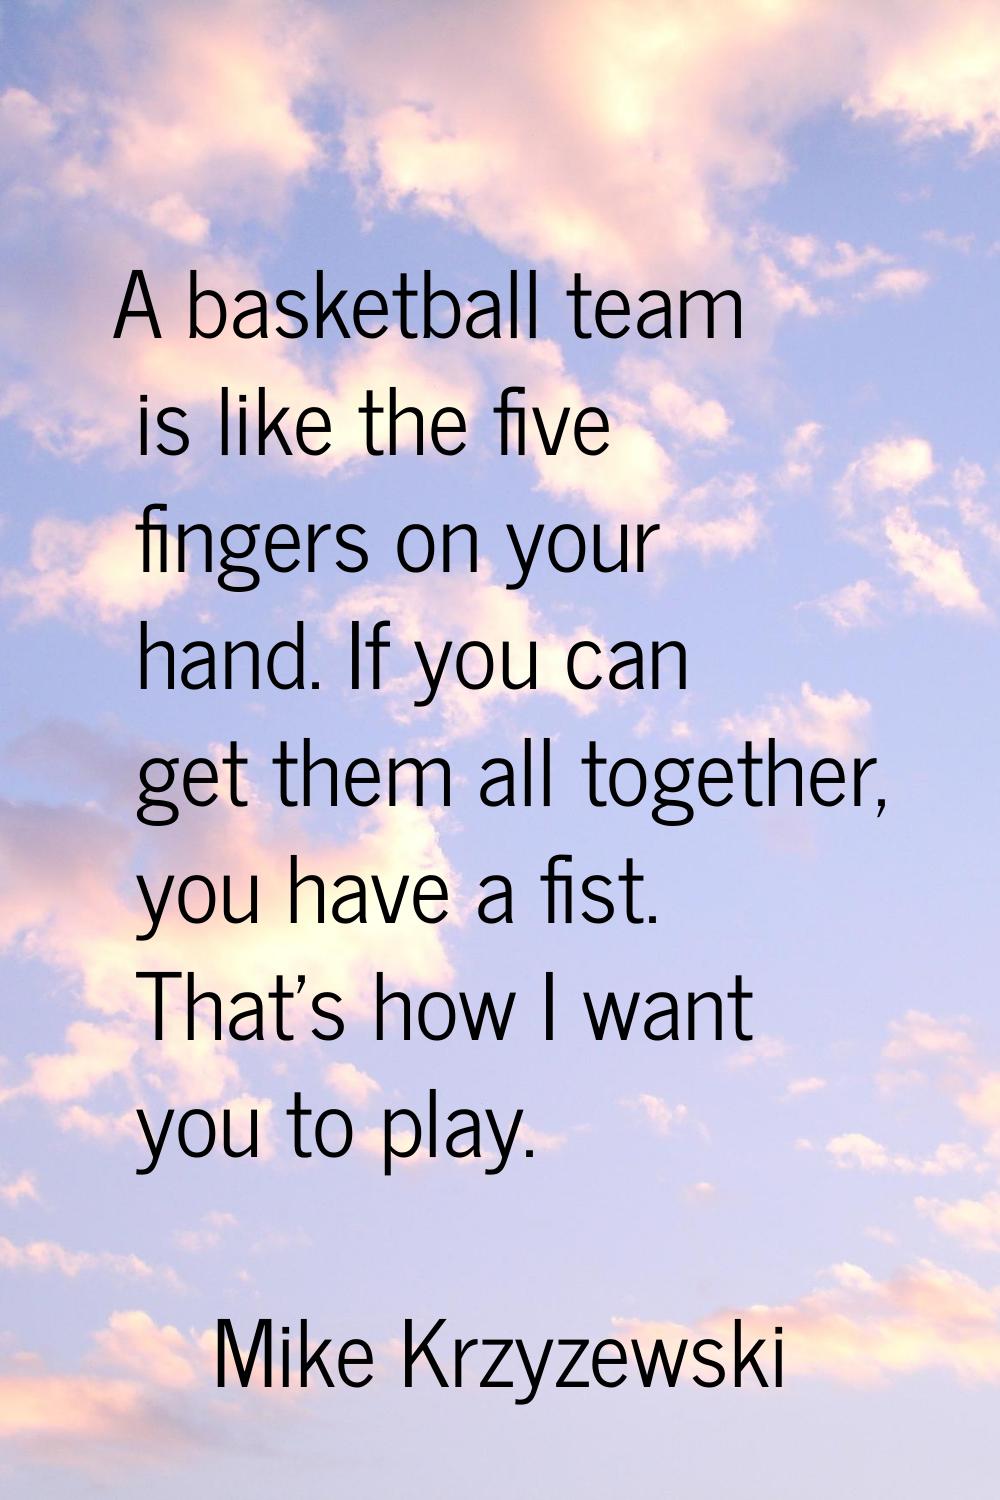 A basketball team is like the five fingers on your hand. If you can get them all together, you have